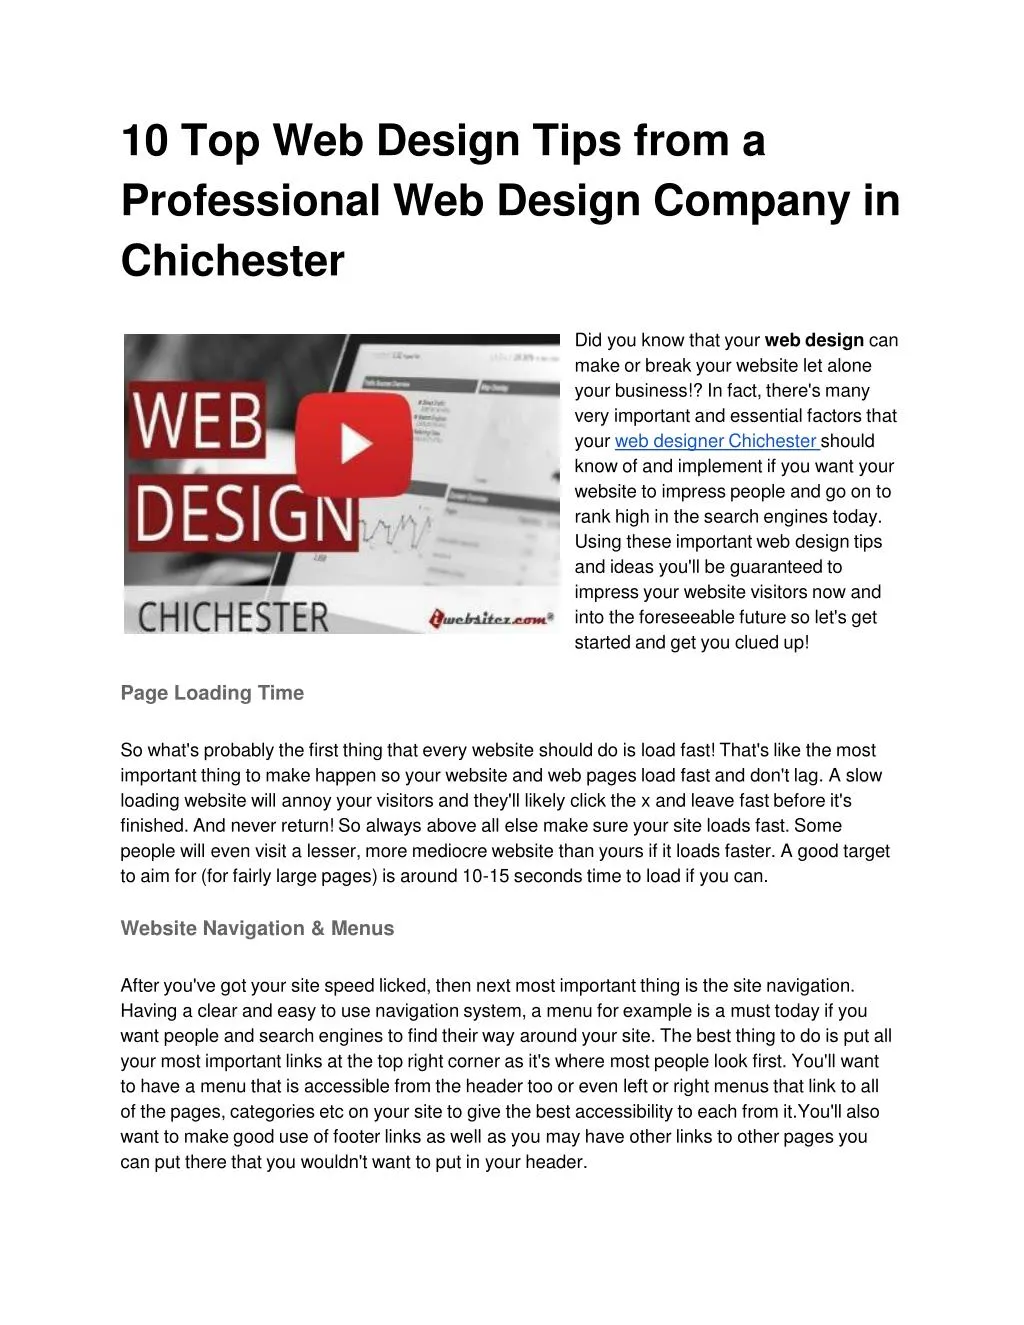 10 top web design tips from a professional web design company in chichester